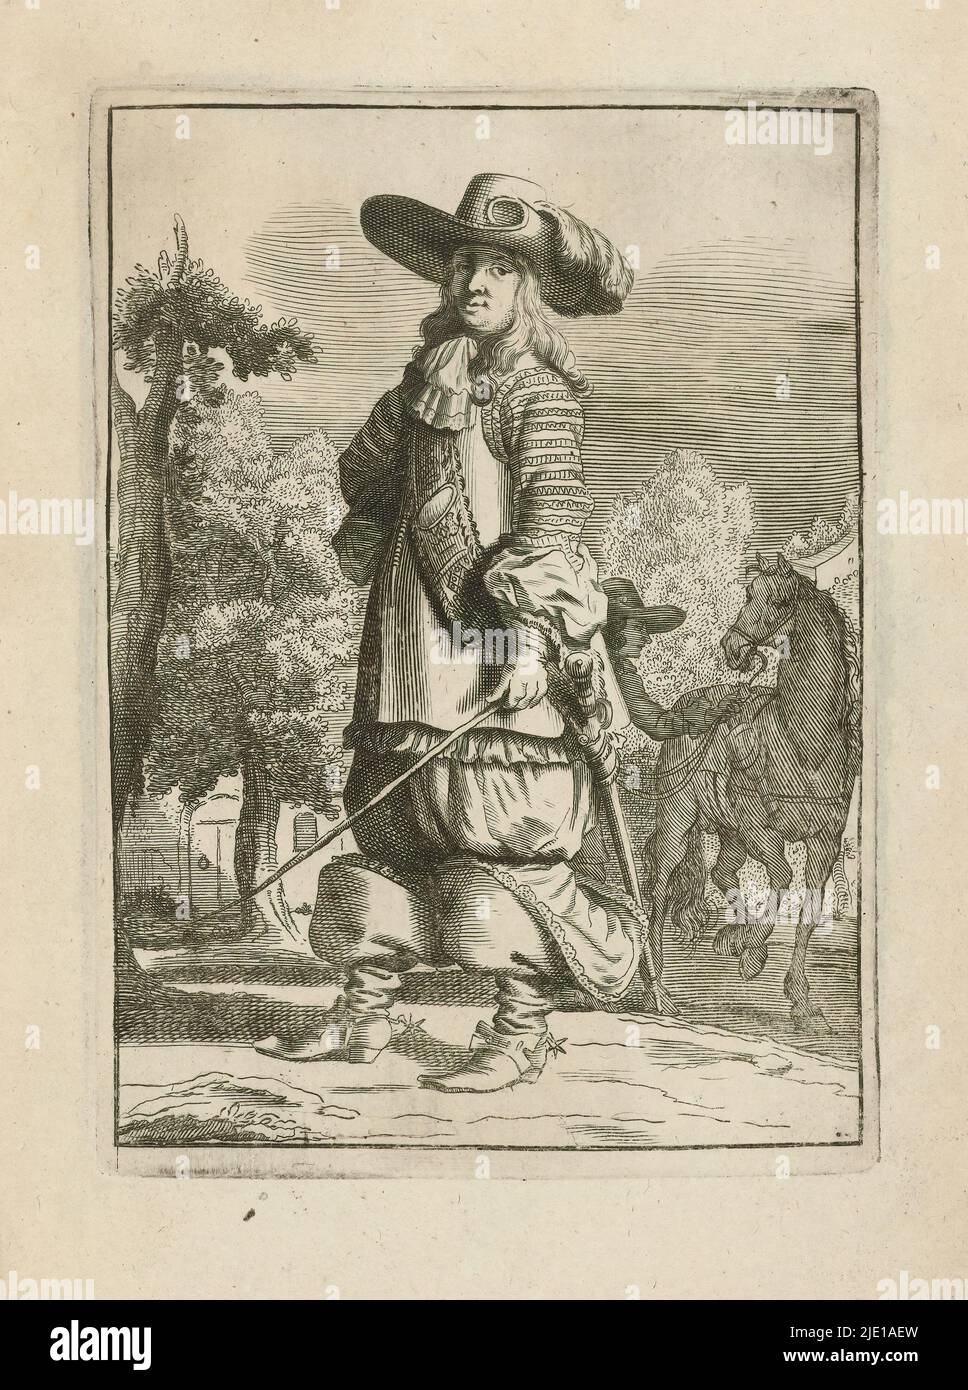 Horseman standing in landscape, dressed according to fashion about 1660, Man in equestrian costume, standing in landscape. Behind him are his horse and servant. The man is dressed in doublet with wide bandier to which his sword is attached. Wide-pocketed knee breeches and boots with wide shafts and spurs. Hat with wide brim and plume on head. Whip in left hand., print maker: Jan van Troyen, after design by: Gerbrand van den Eeckhout, publisher: Hugo Allard (I), c. 1660, paper, engraving, height 176 mm × width 128 mm Stock Photo